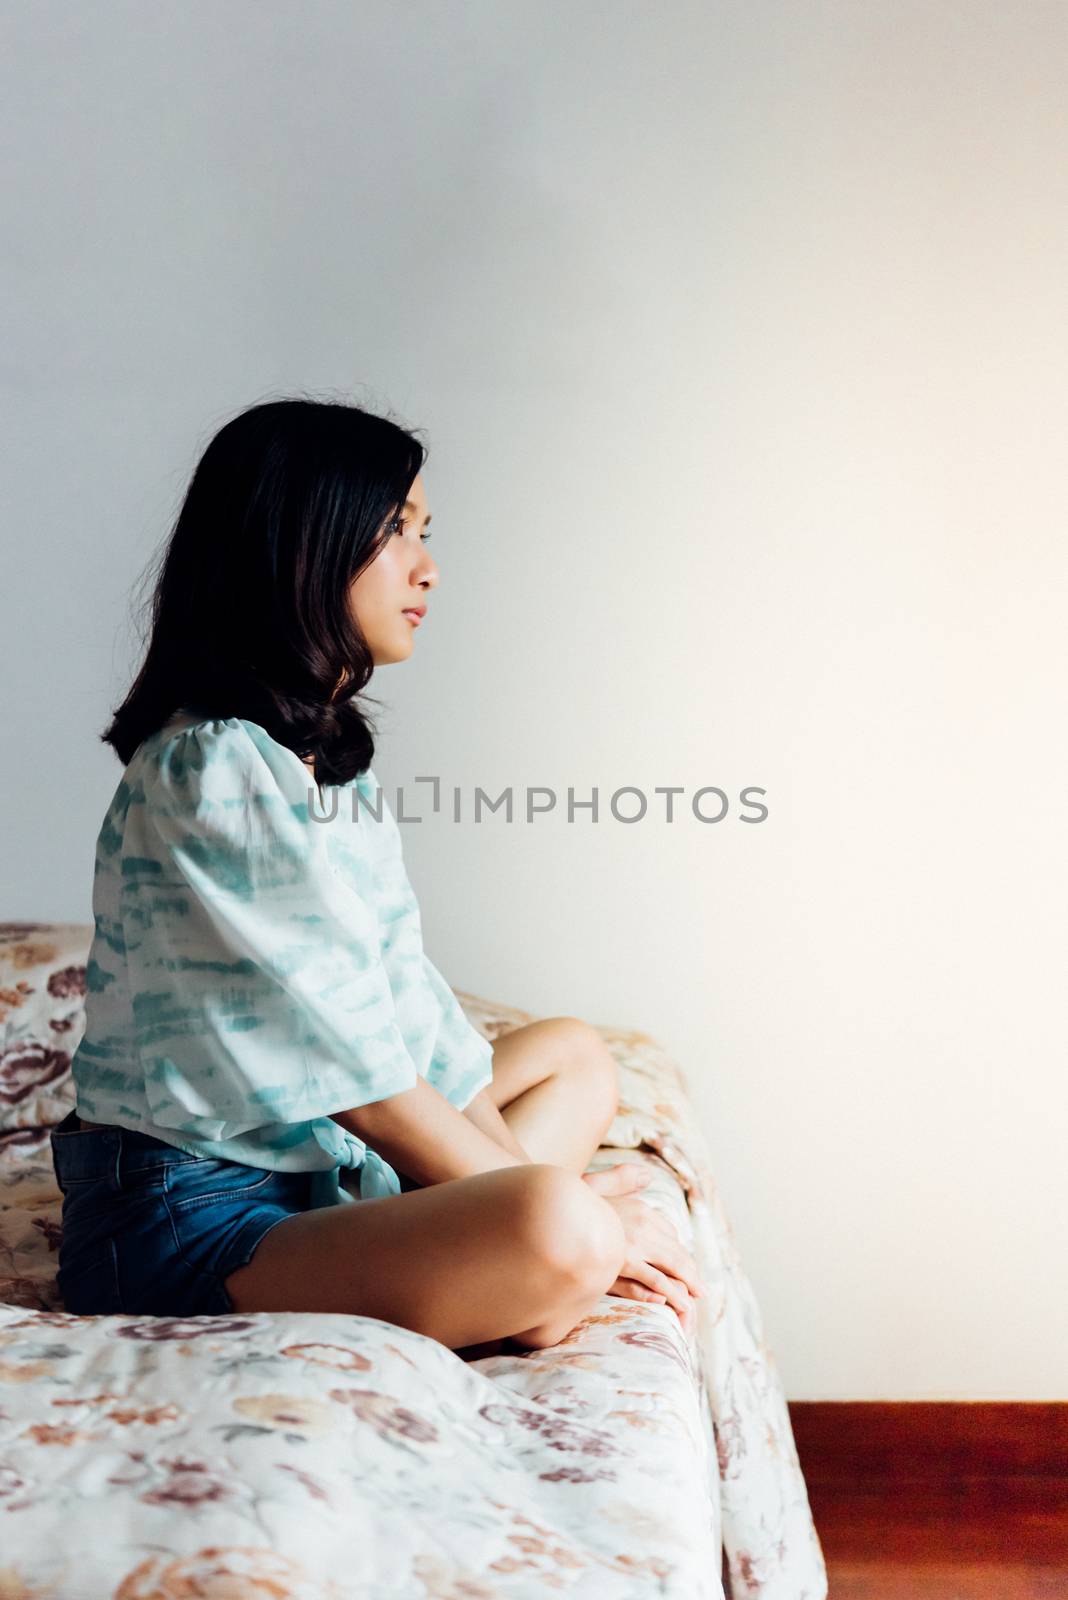 Asian pretty woman short jeans sitting on bed in bedroom alone with loneliness and lonely emotion in concept depressed feeling, depression, problem in life